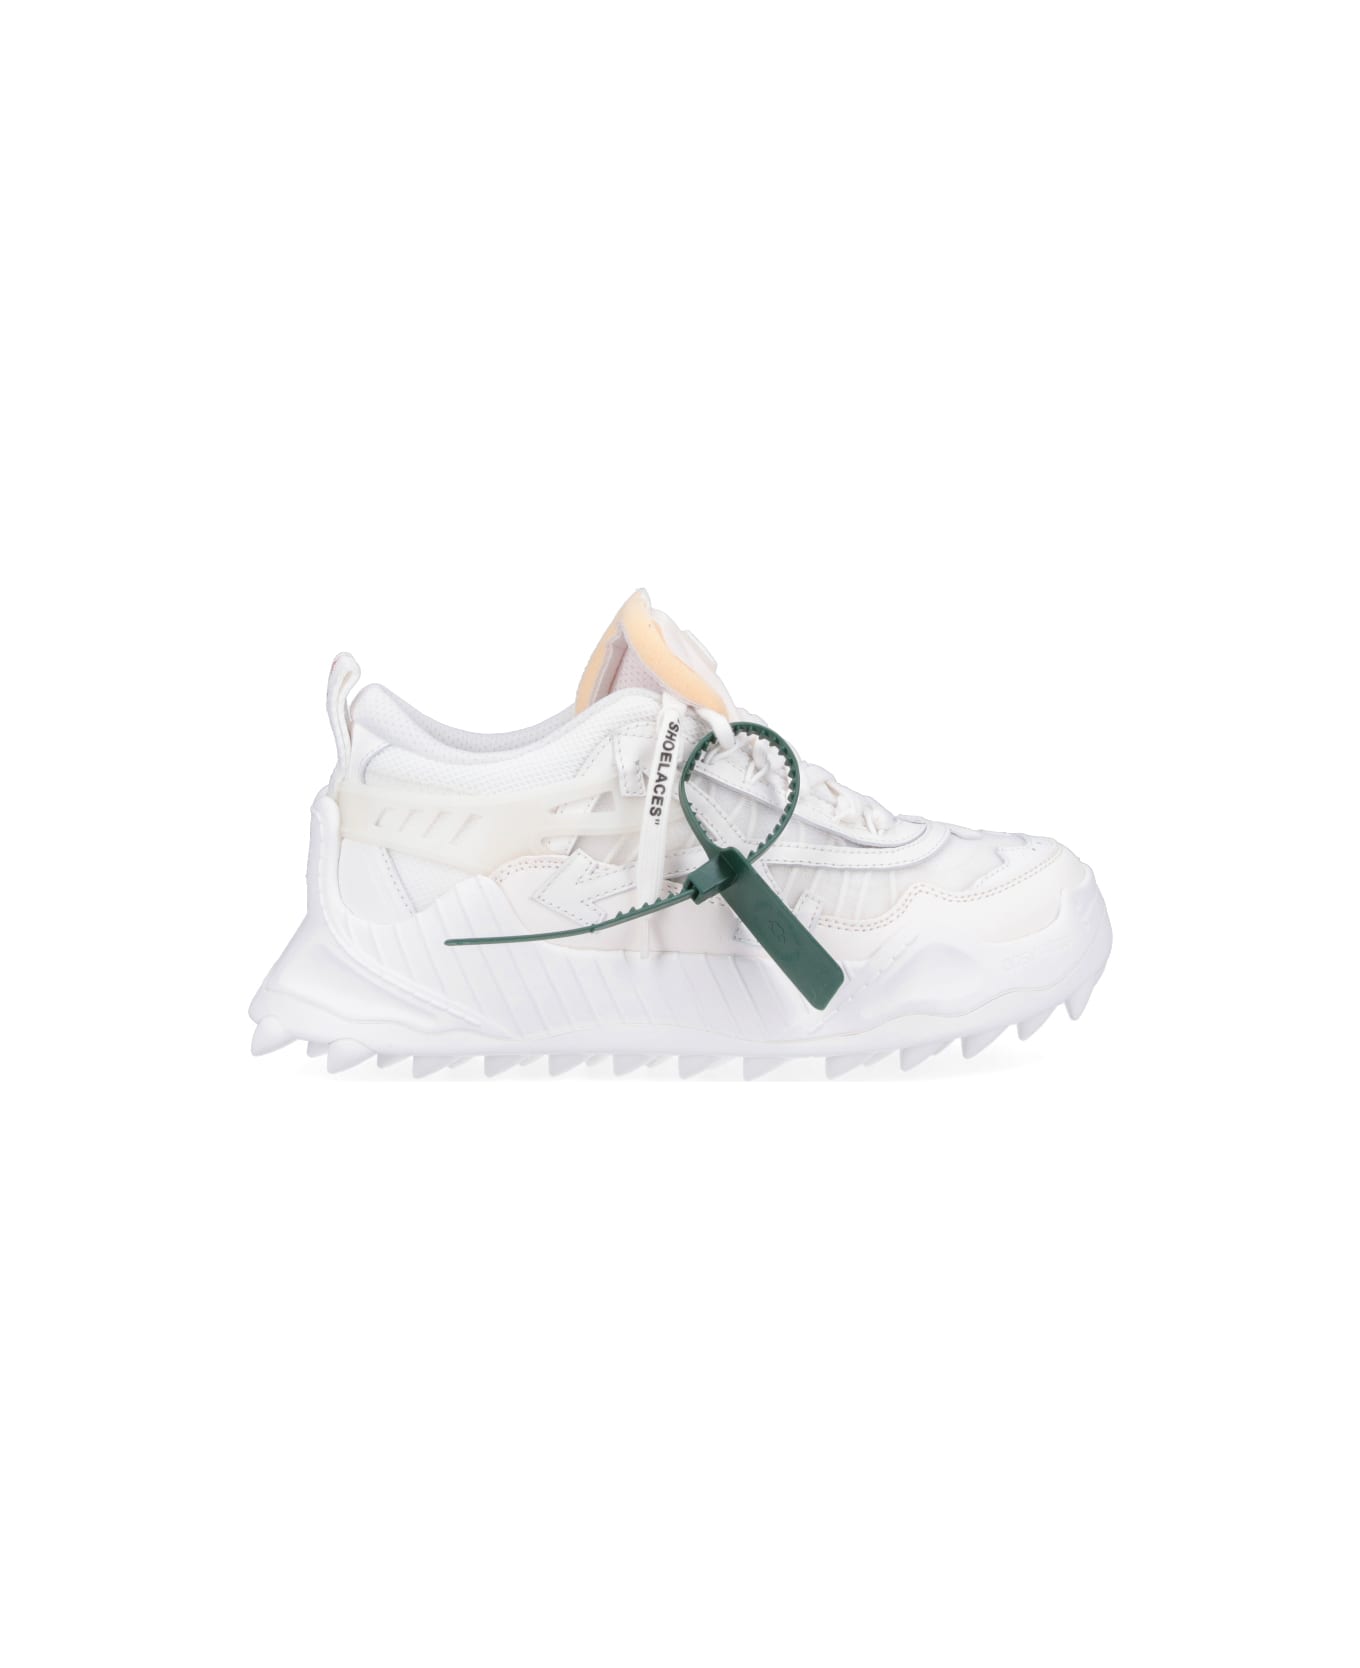 Off-White Odsy 1000 Sneakers In White Leather And Fabric Blend - White White